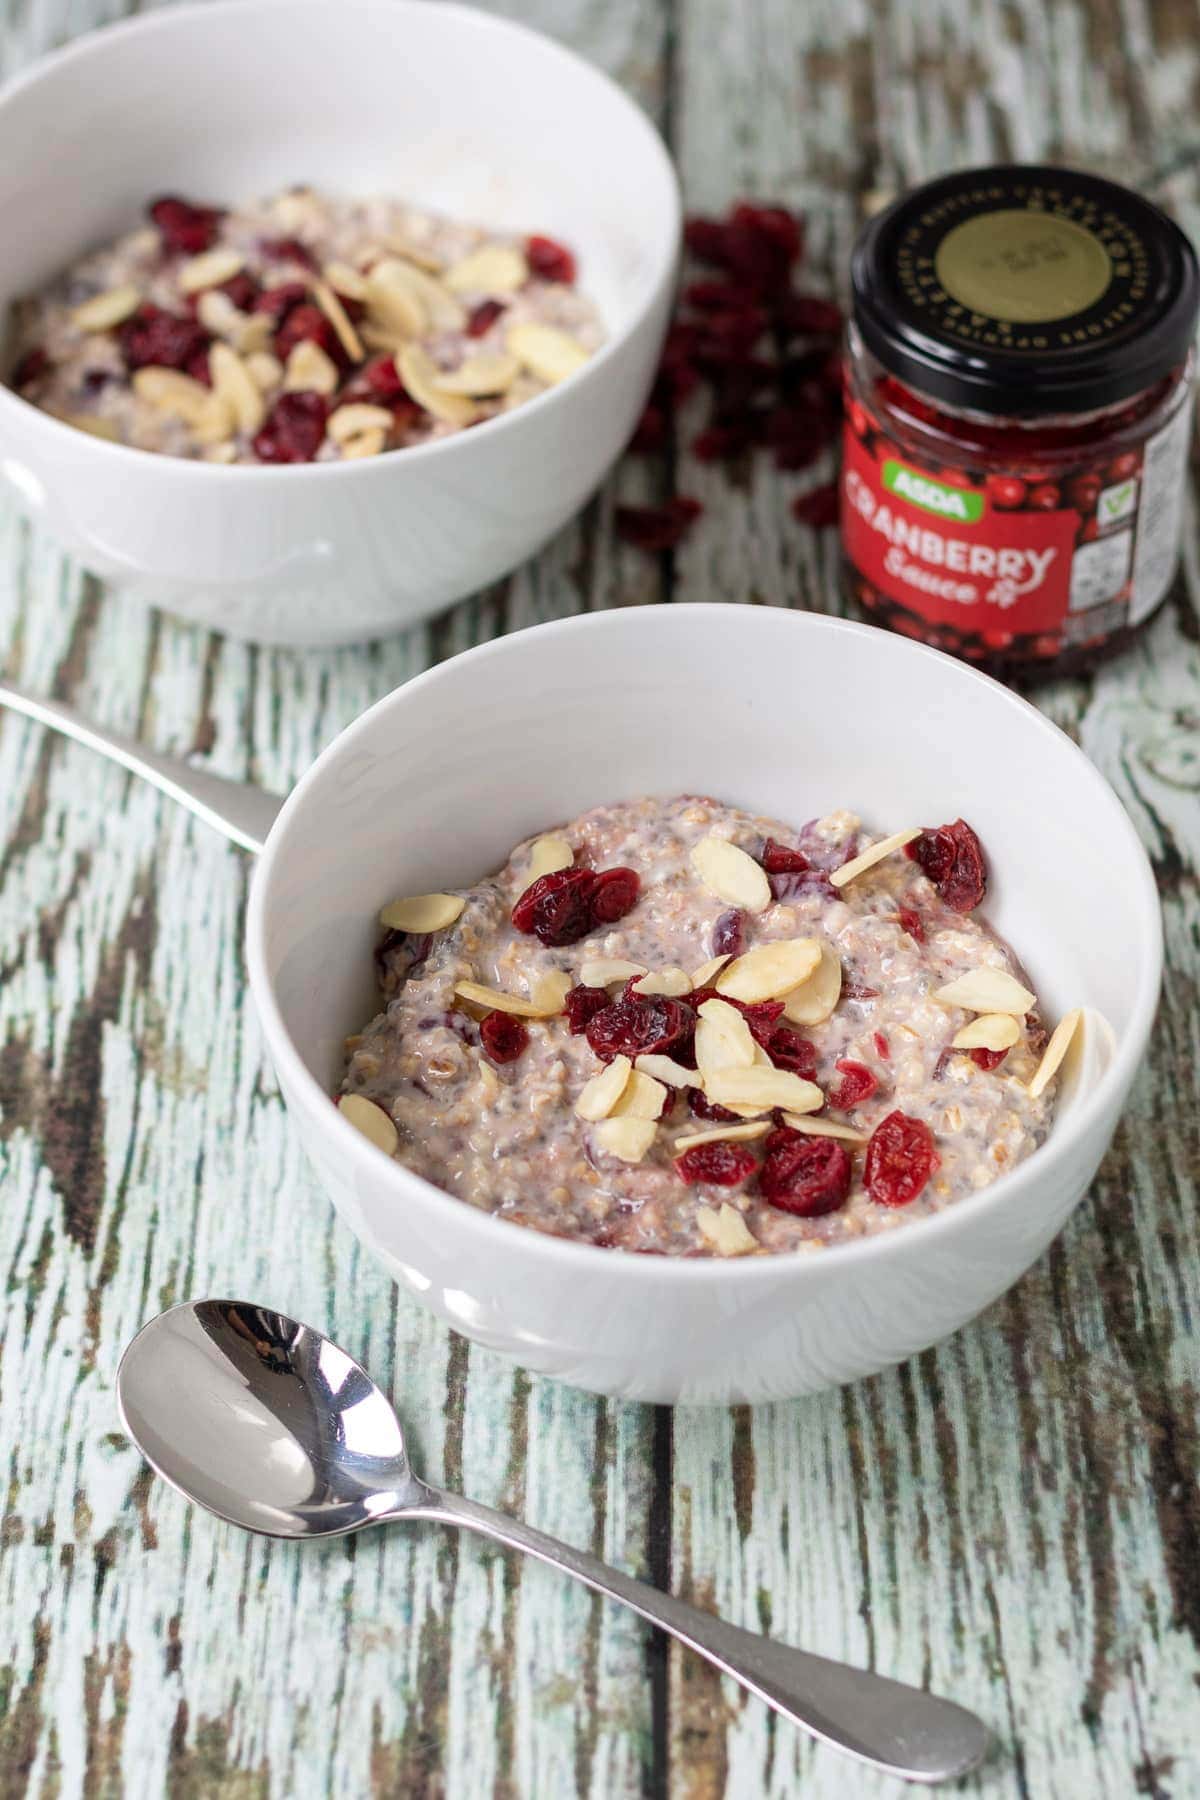 Two bowls of cranberry overnight oats with spoons between. A jar of cranberry sauce at top right.